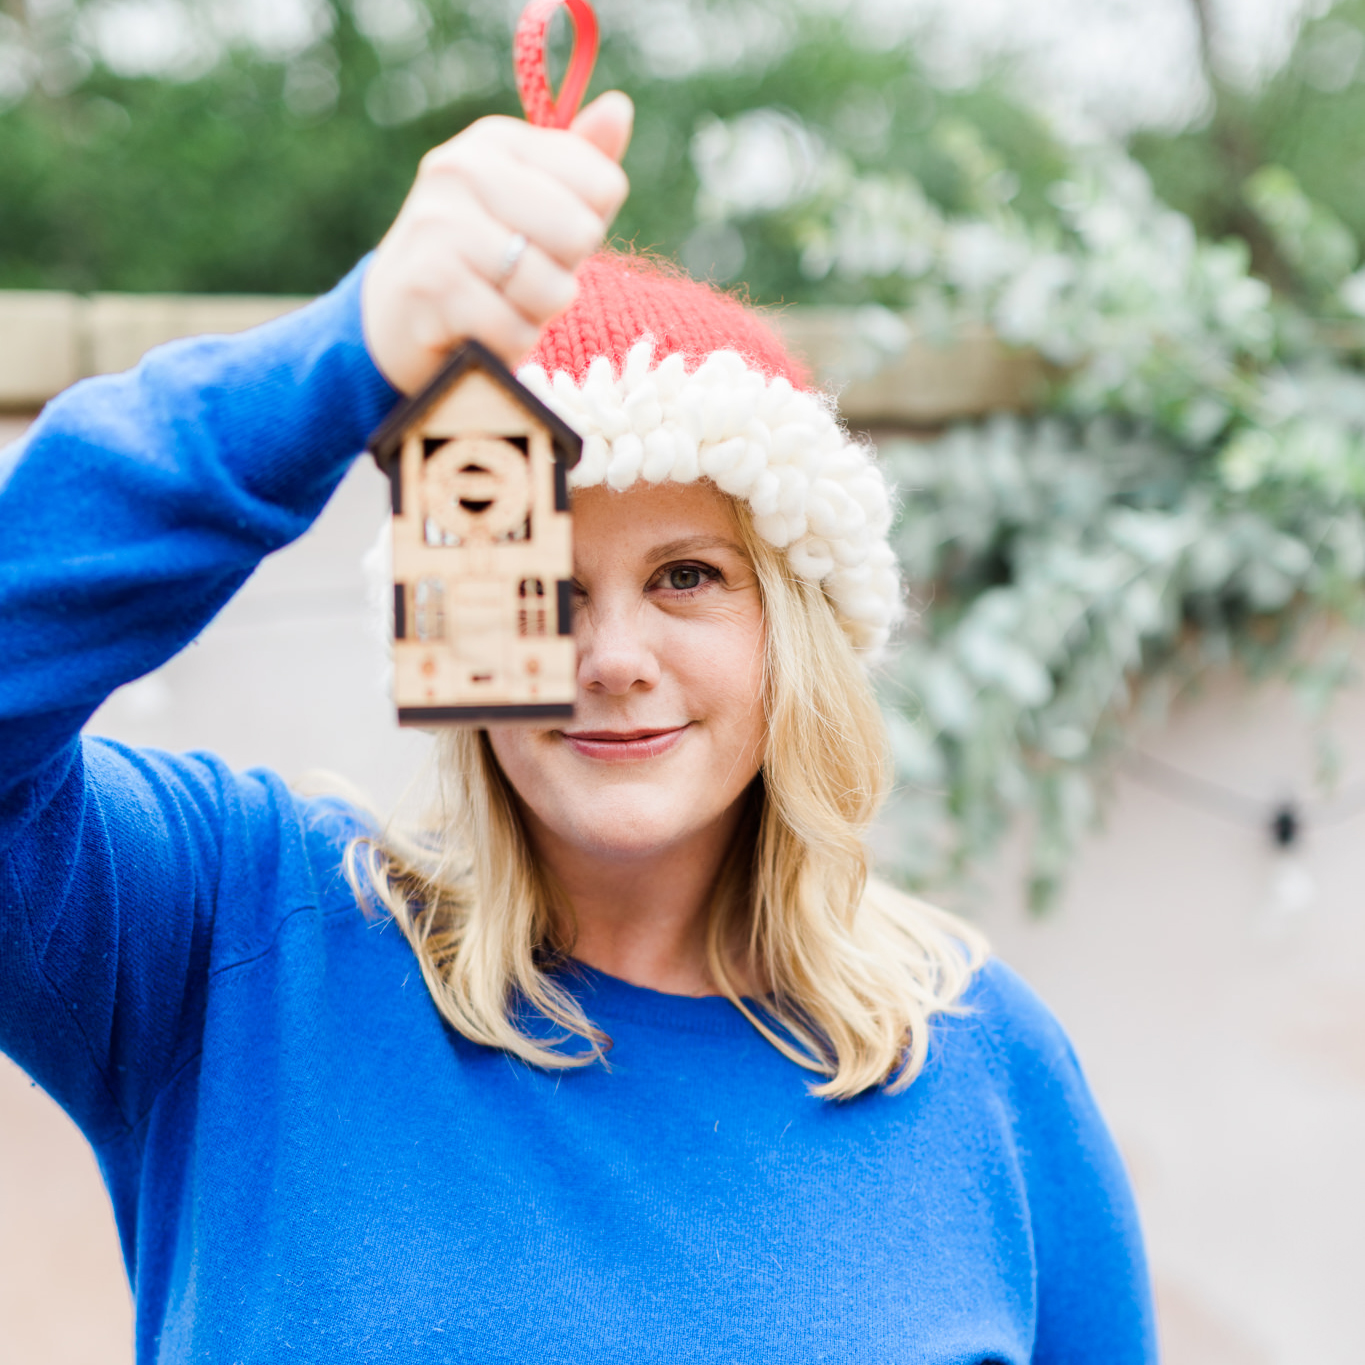 Betsy Benn said her company has brought forward their production of Christmas-related items to avoid the soaring energy costs expected for October (Emma Jackson Photography)